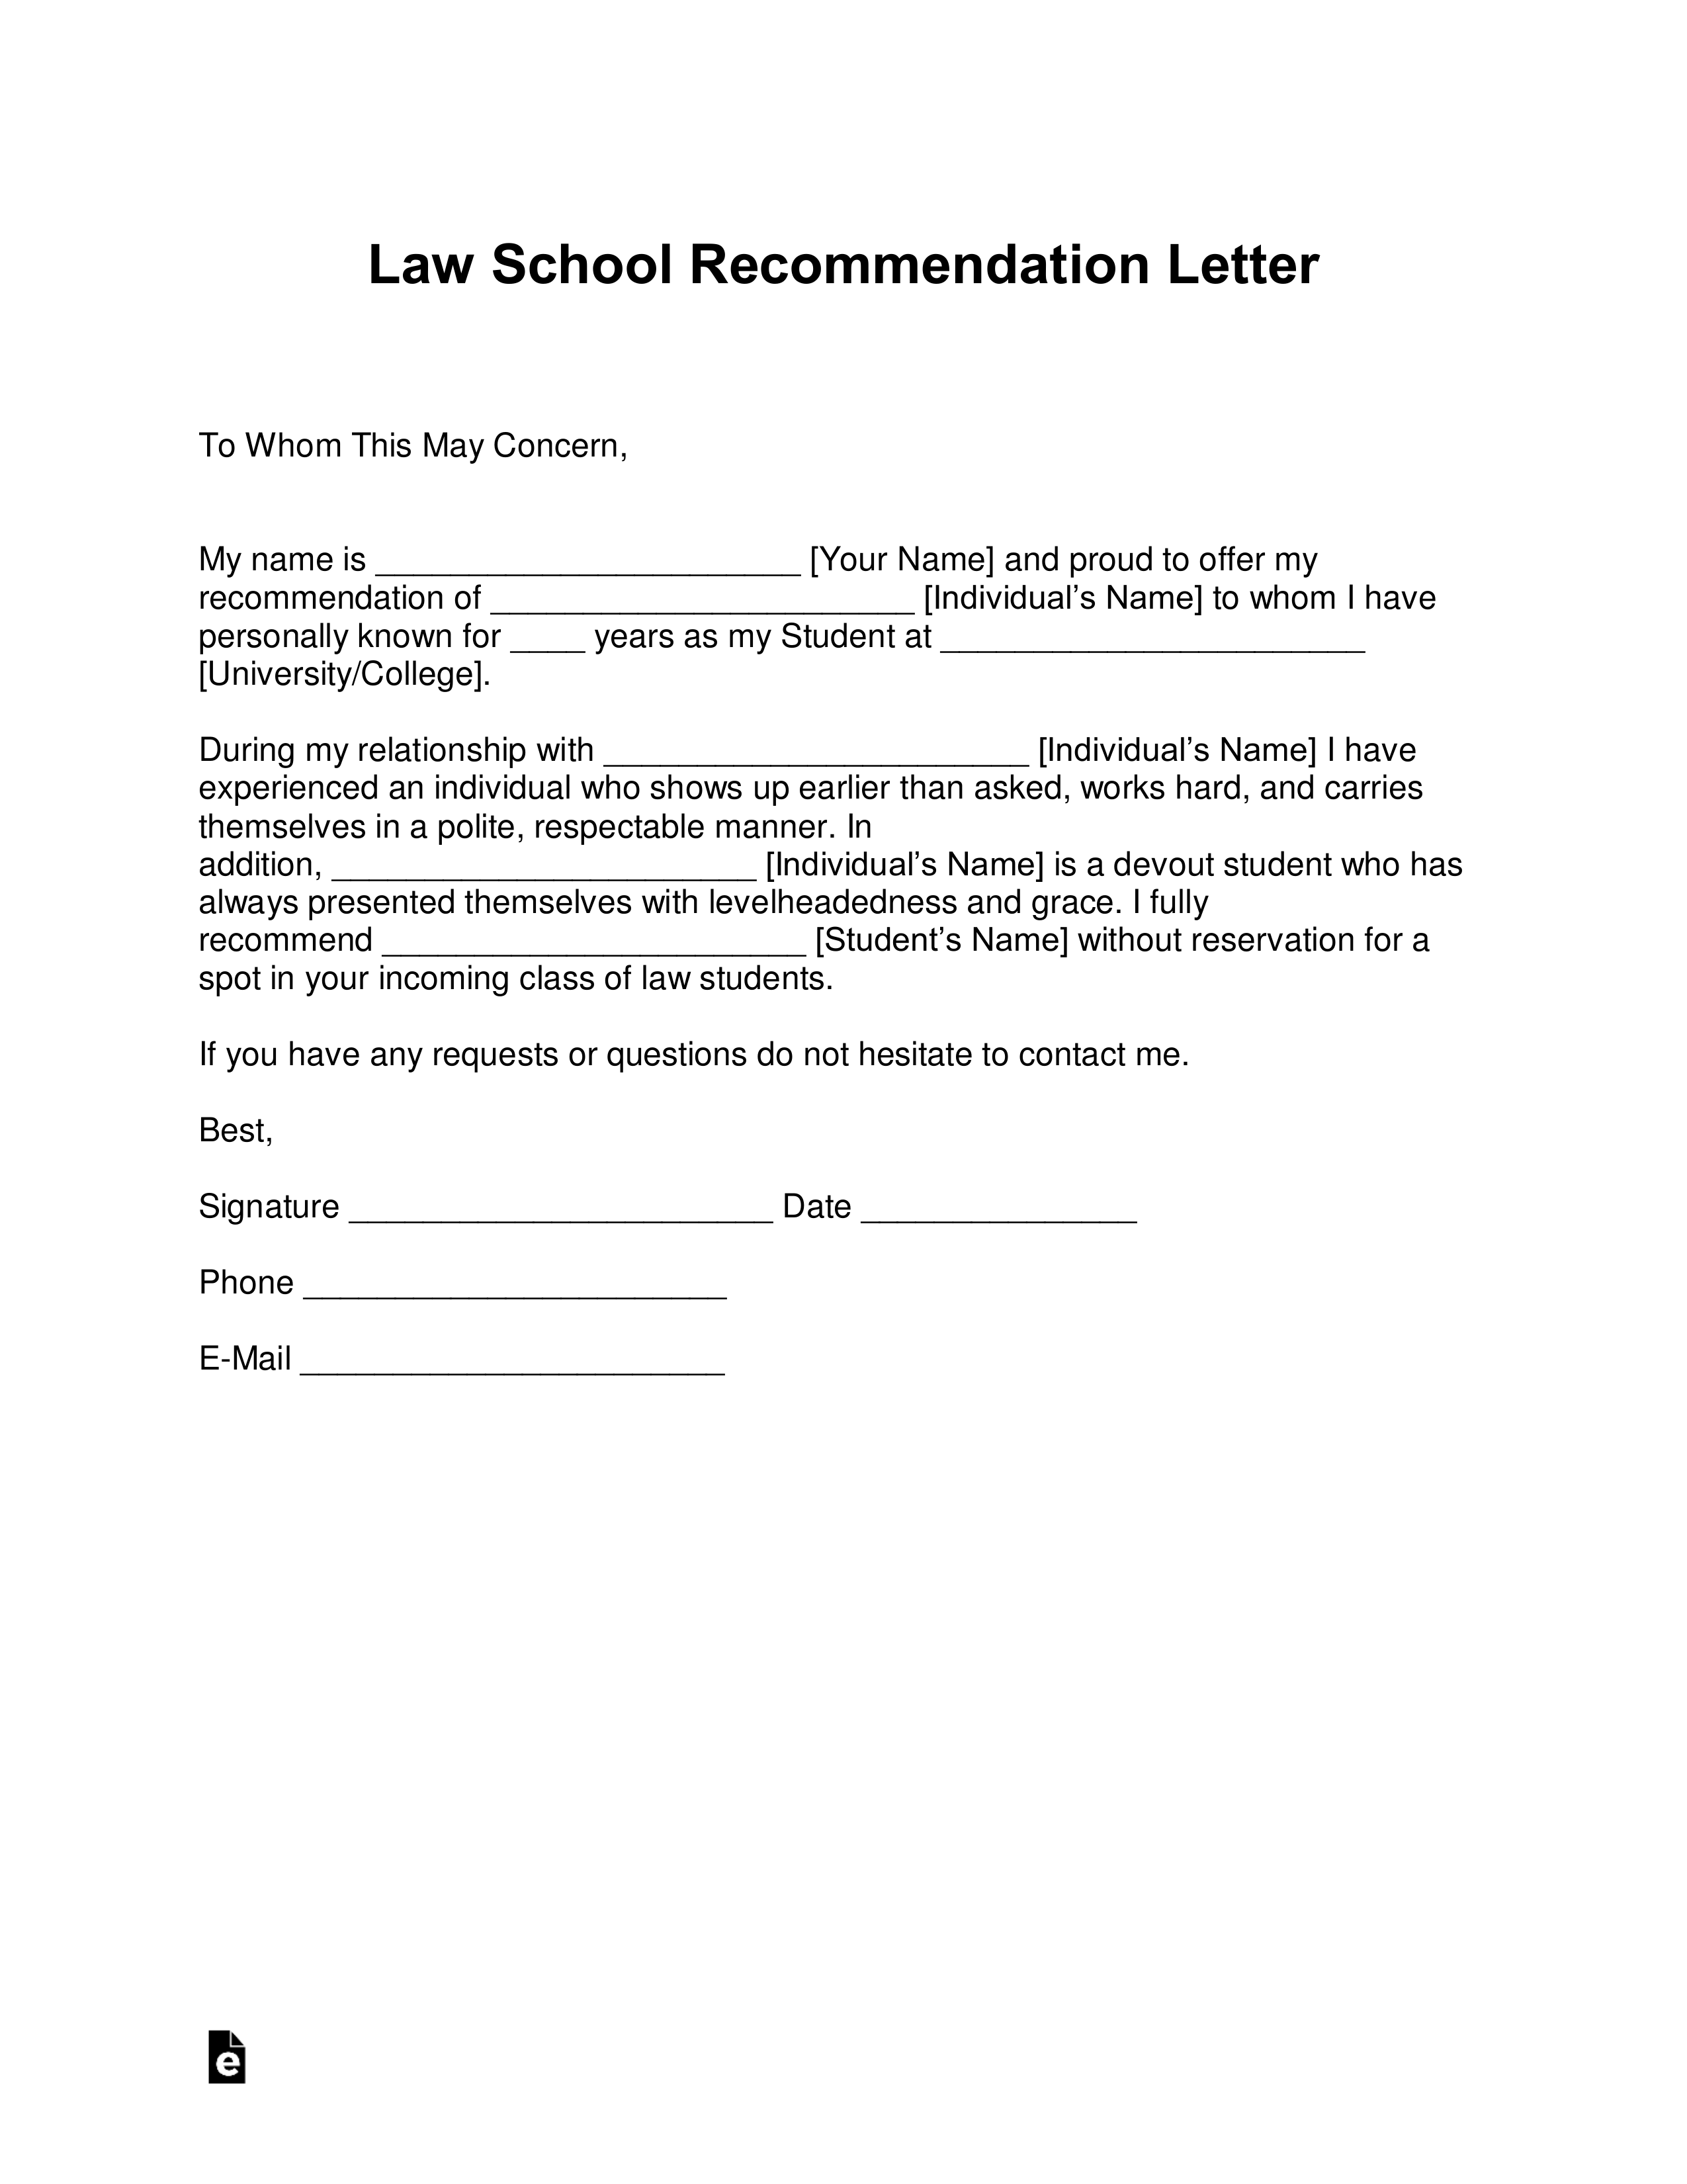 Examples Of A Recommendation Letter from eforms.com